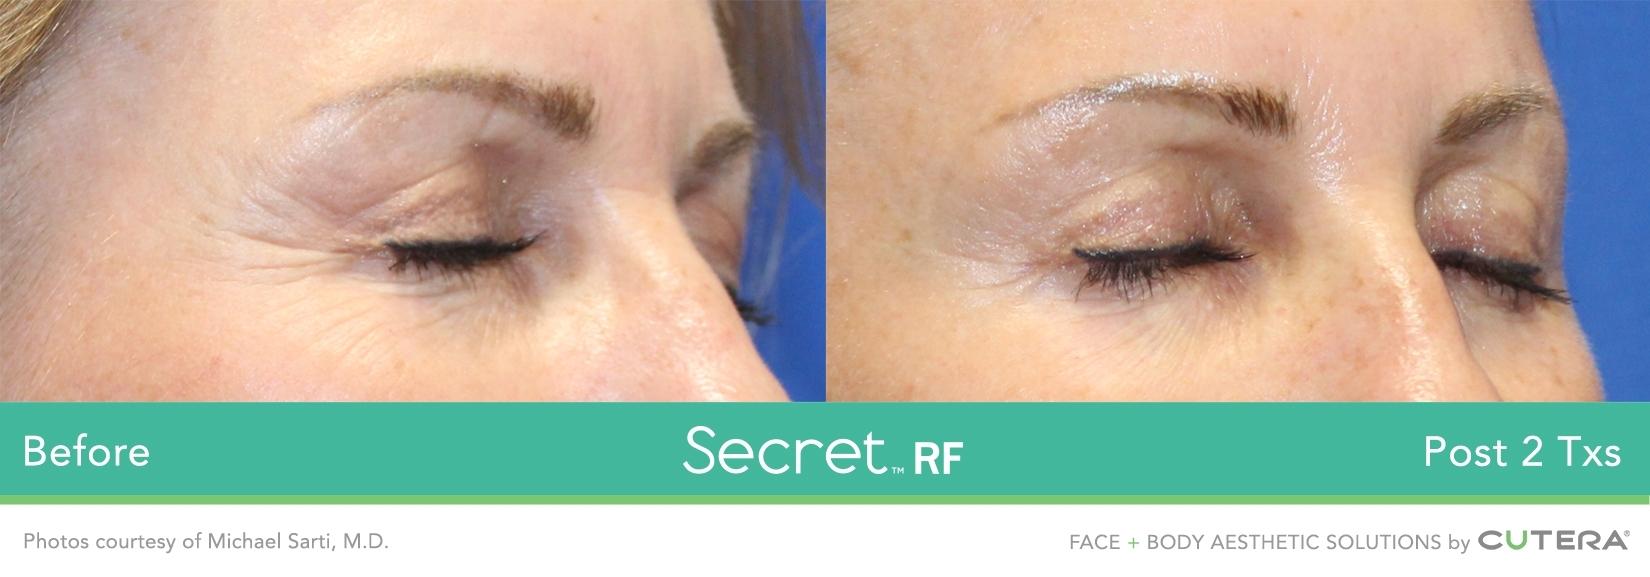 Secret RF: Patient 11 - Before and After 1